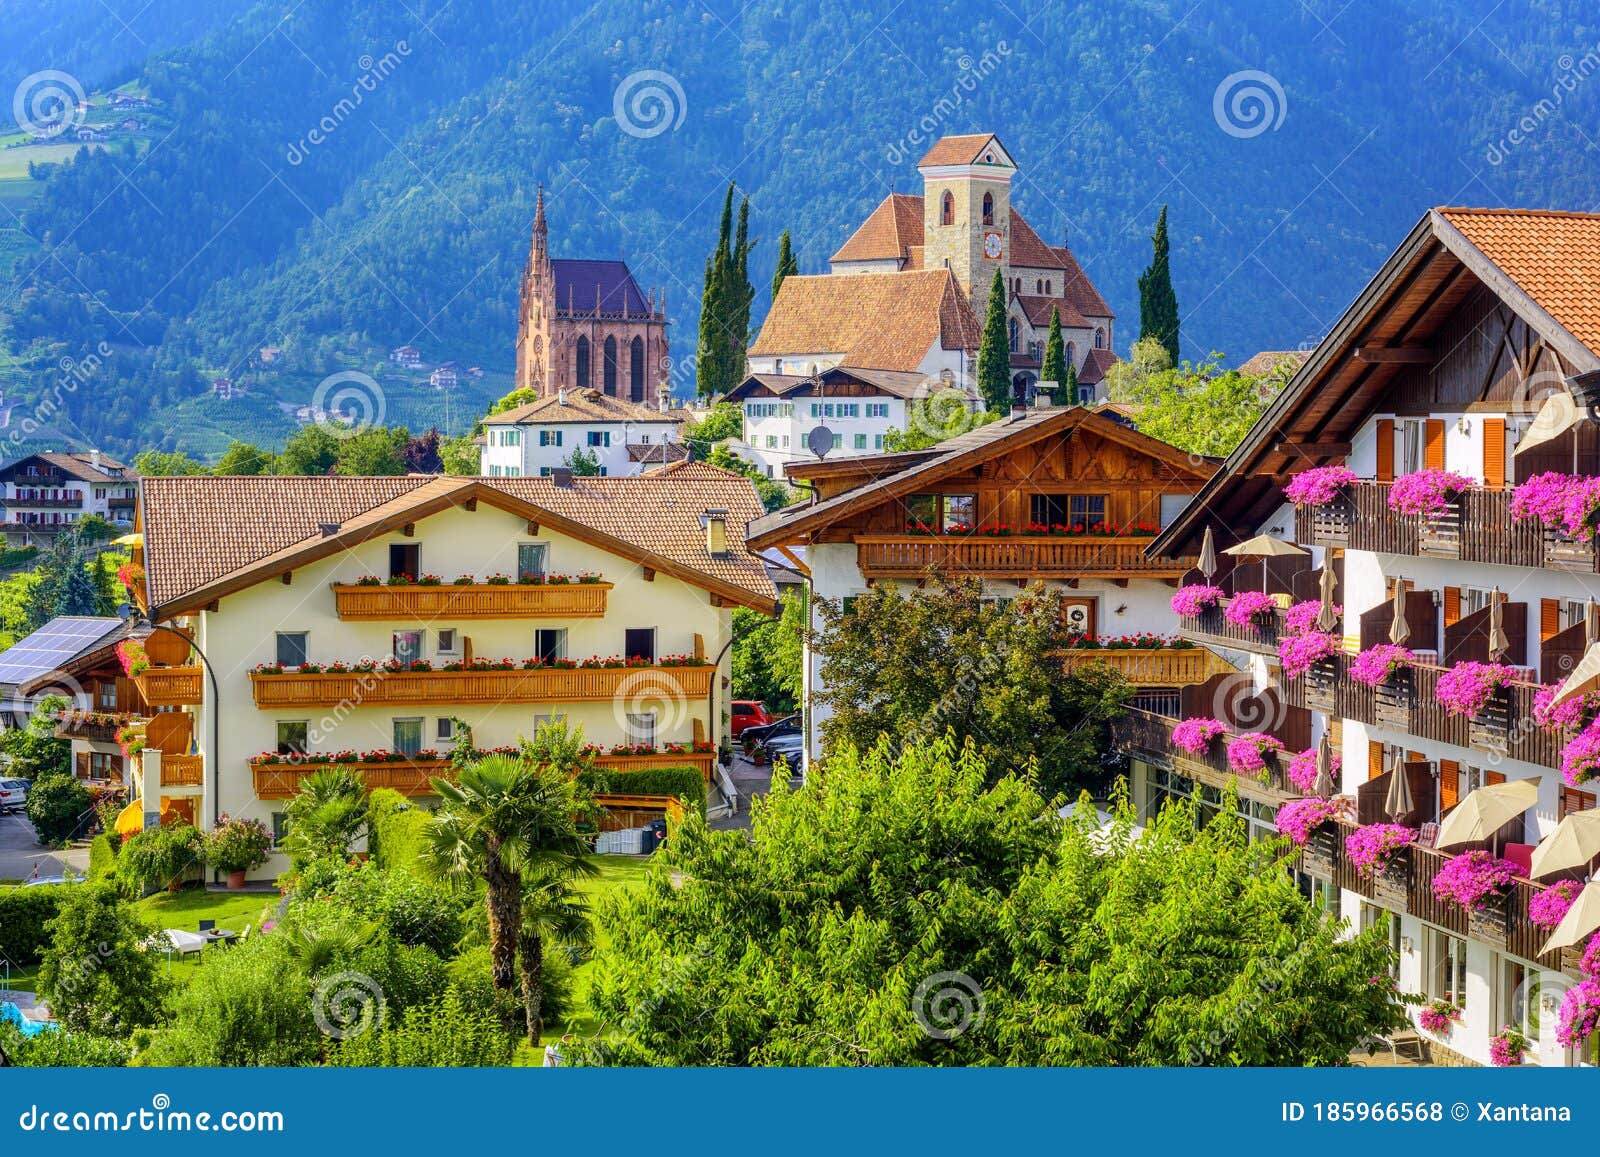 scena schenna town in south tyrol, merano, italy